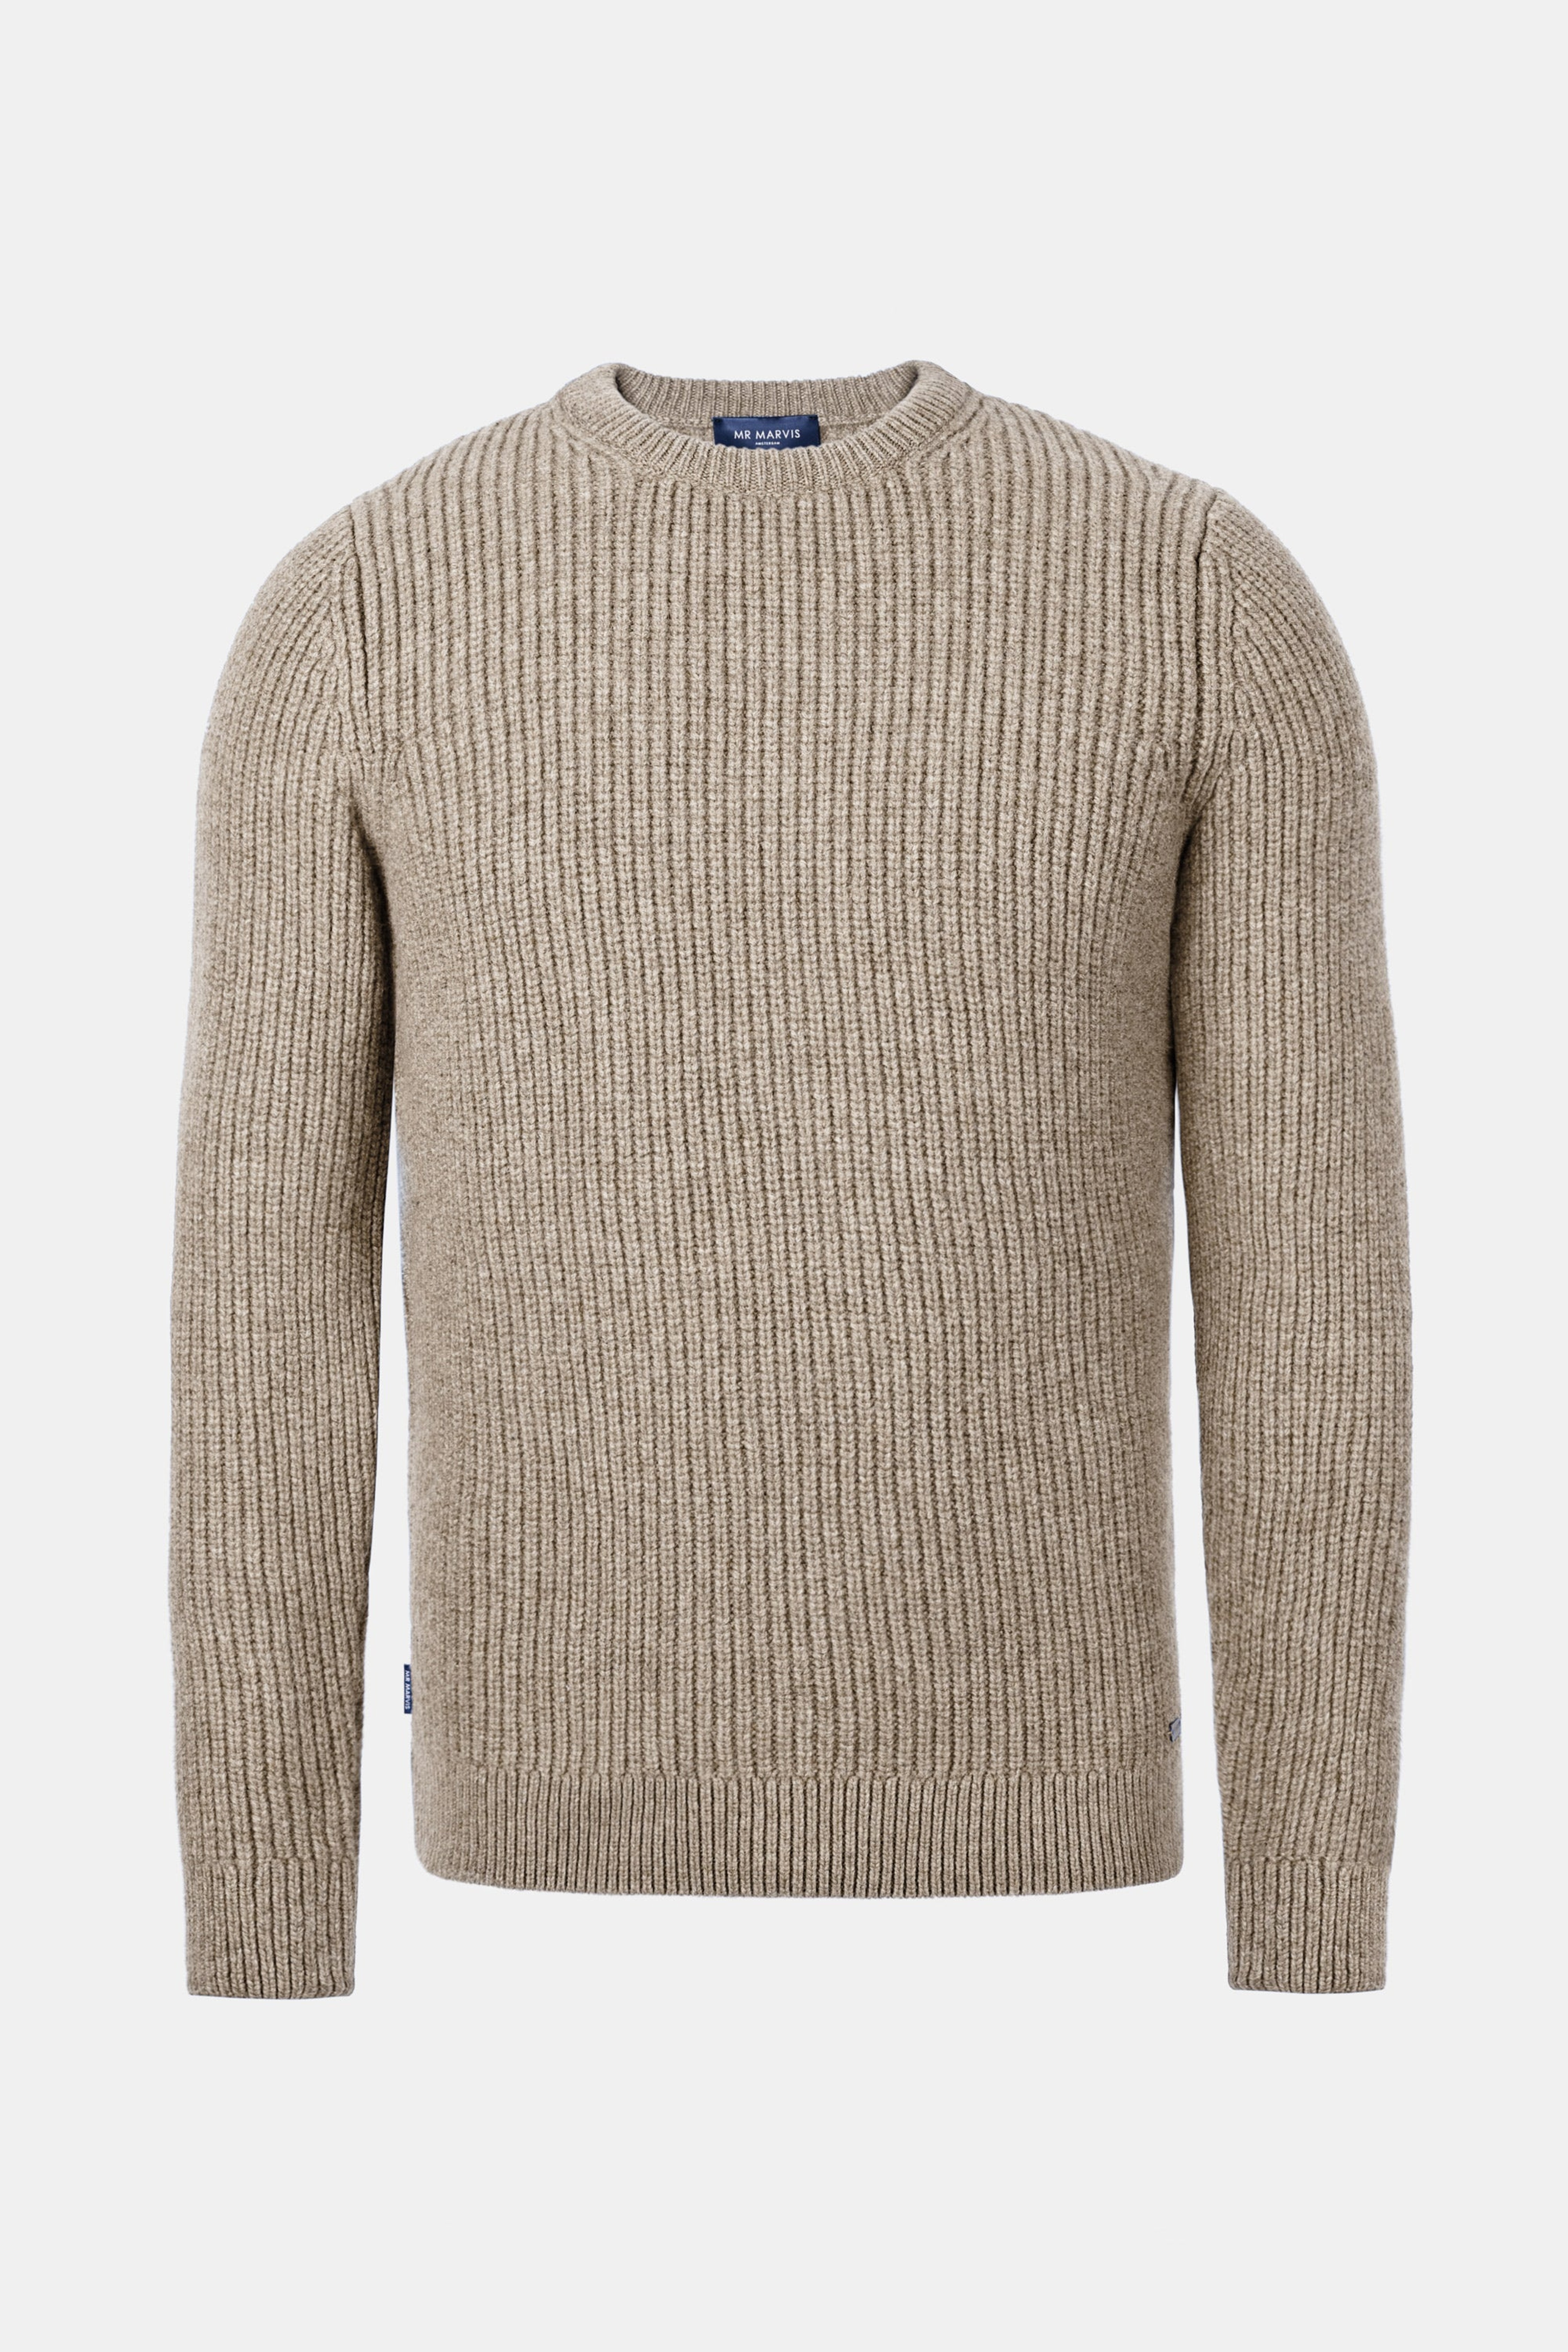 Baristas - The Knit Pullover